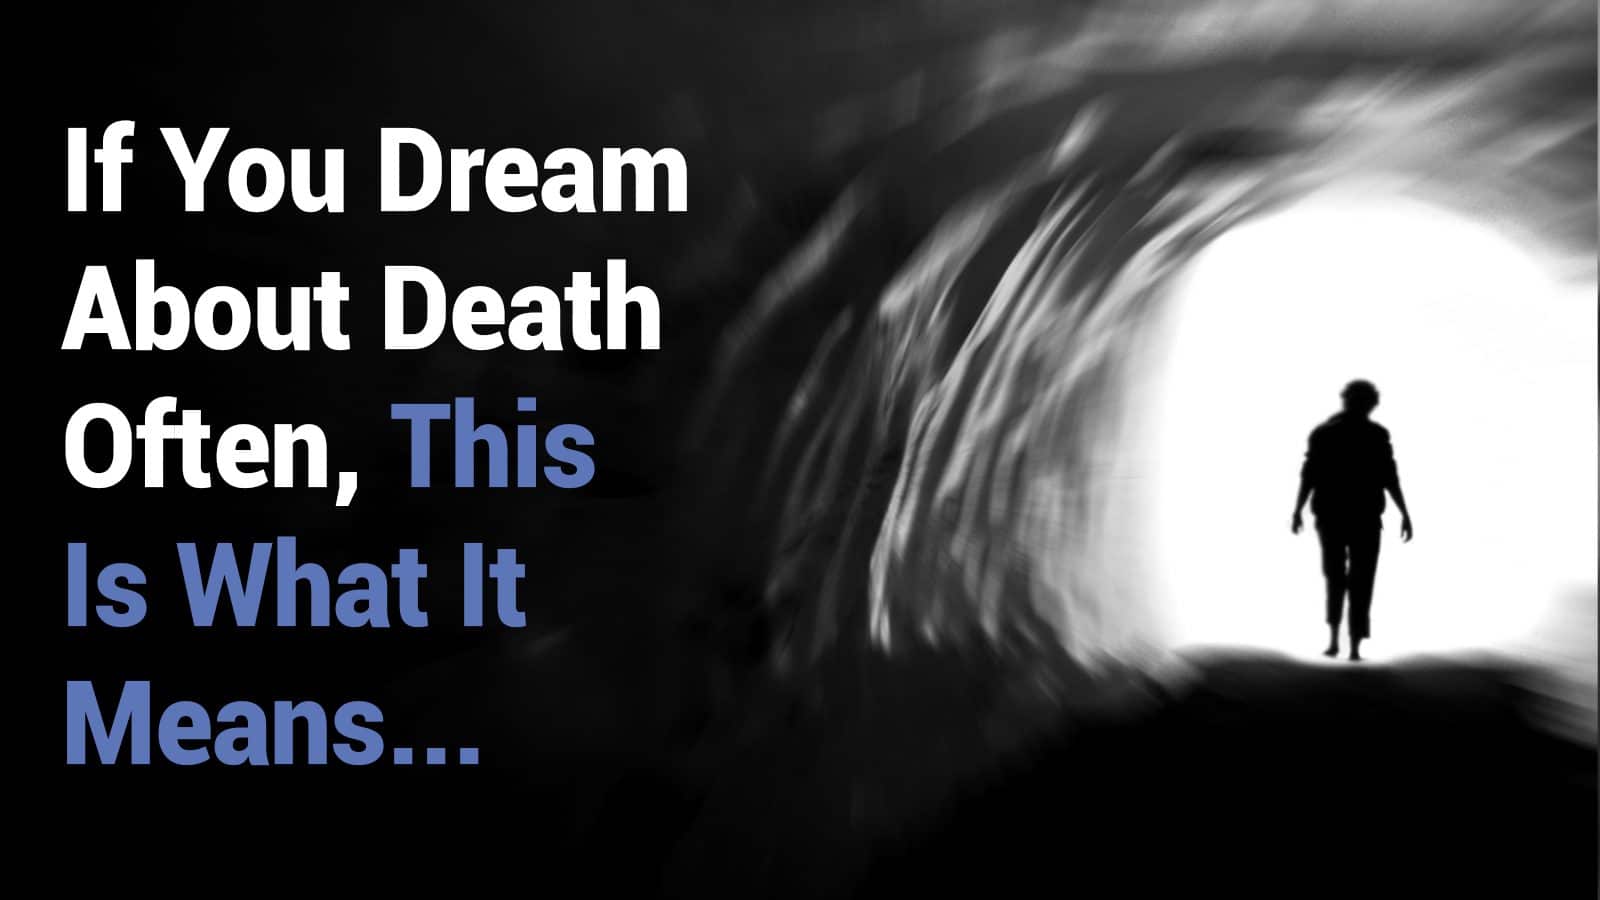 If You Dream About Death Often, This Is What It Means